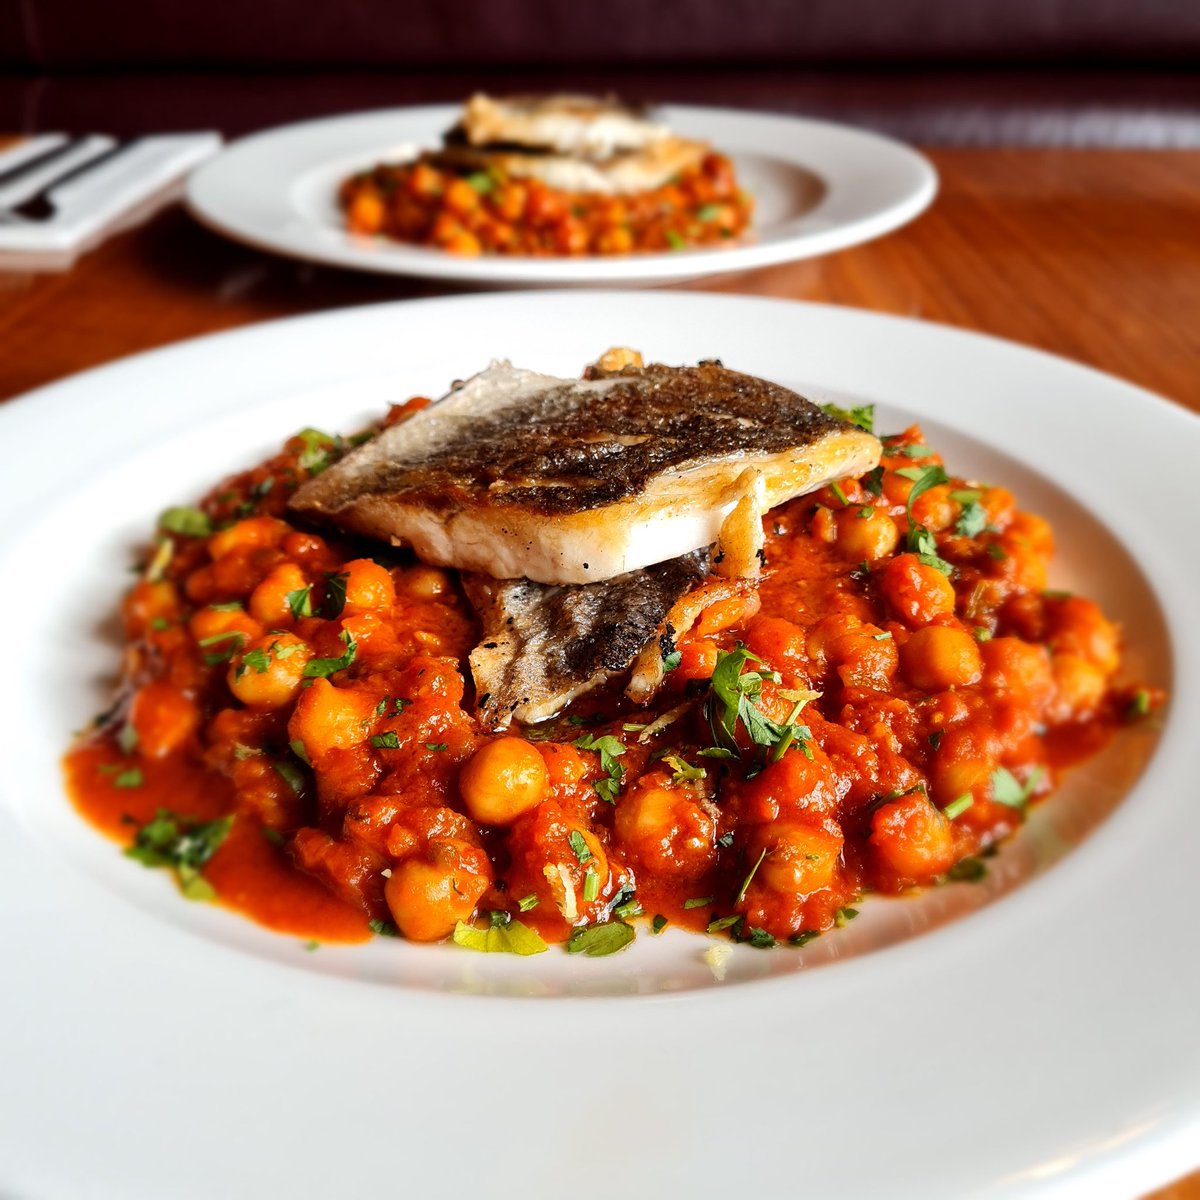 Another tasty dish on our menu, roast cod with this tasty chick peas & tomato stew We tried it first with the sea bass in this photo 😉 Also new on our menu now are courgette soup and crispy salt & pepper cuttlefish